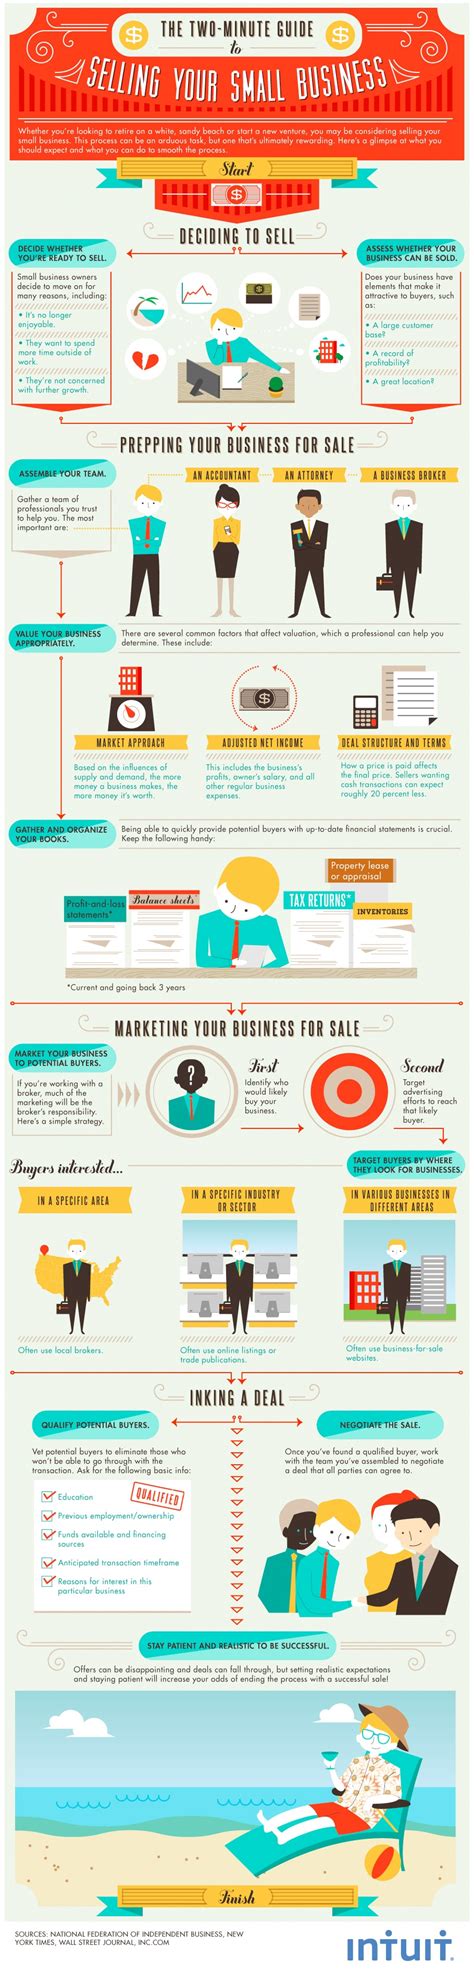 Simple Guide To Selling Your Small Business Infographic